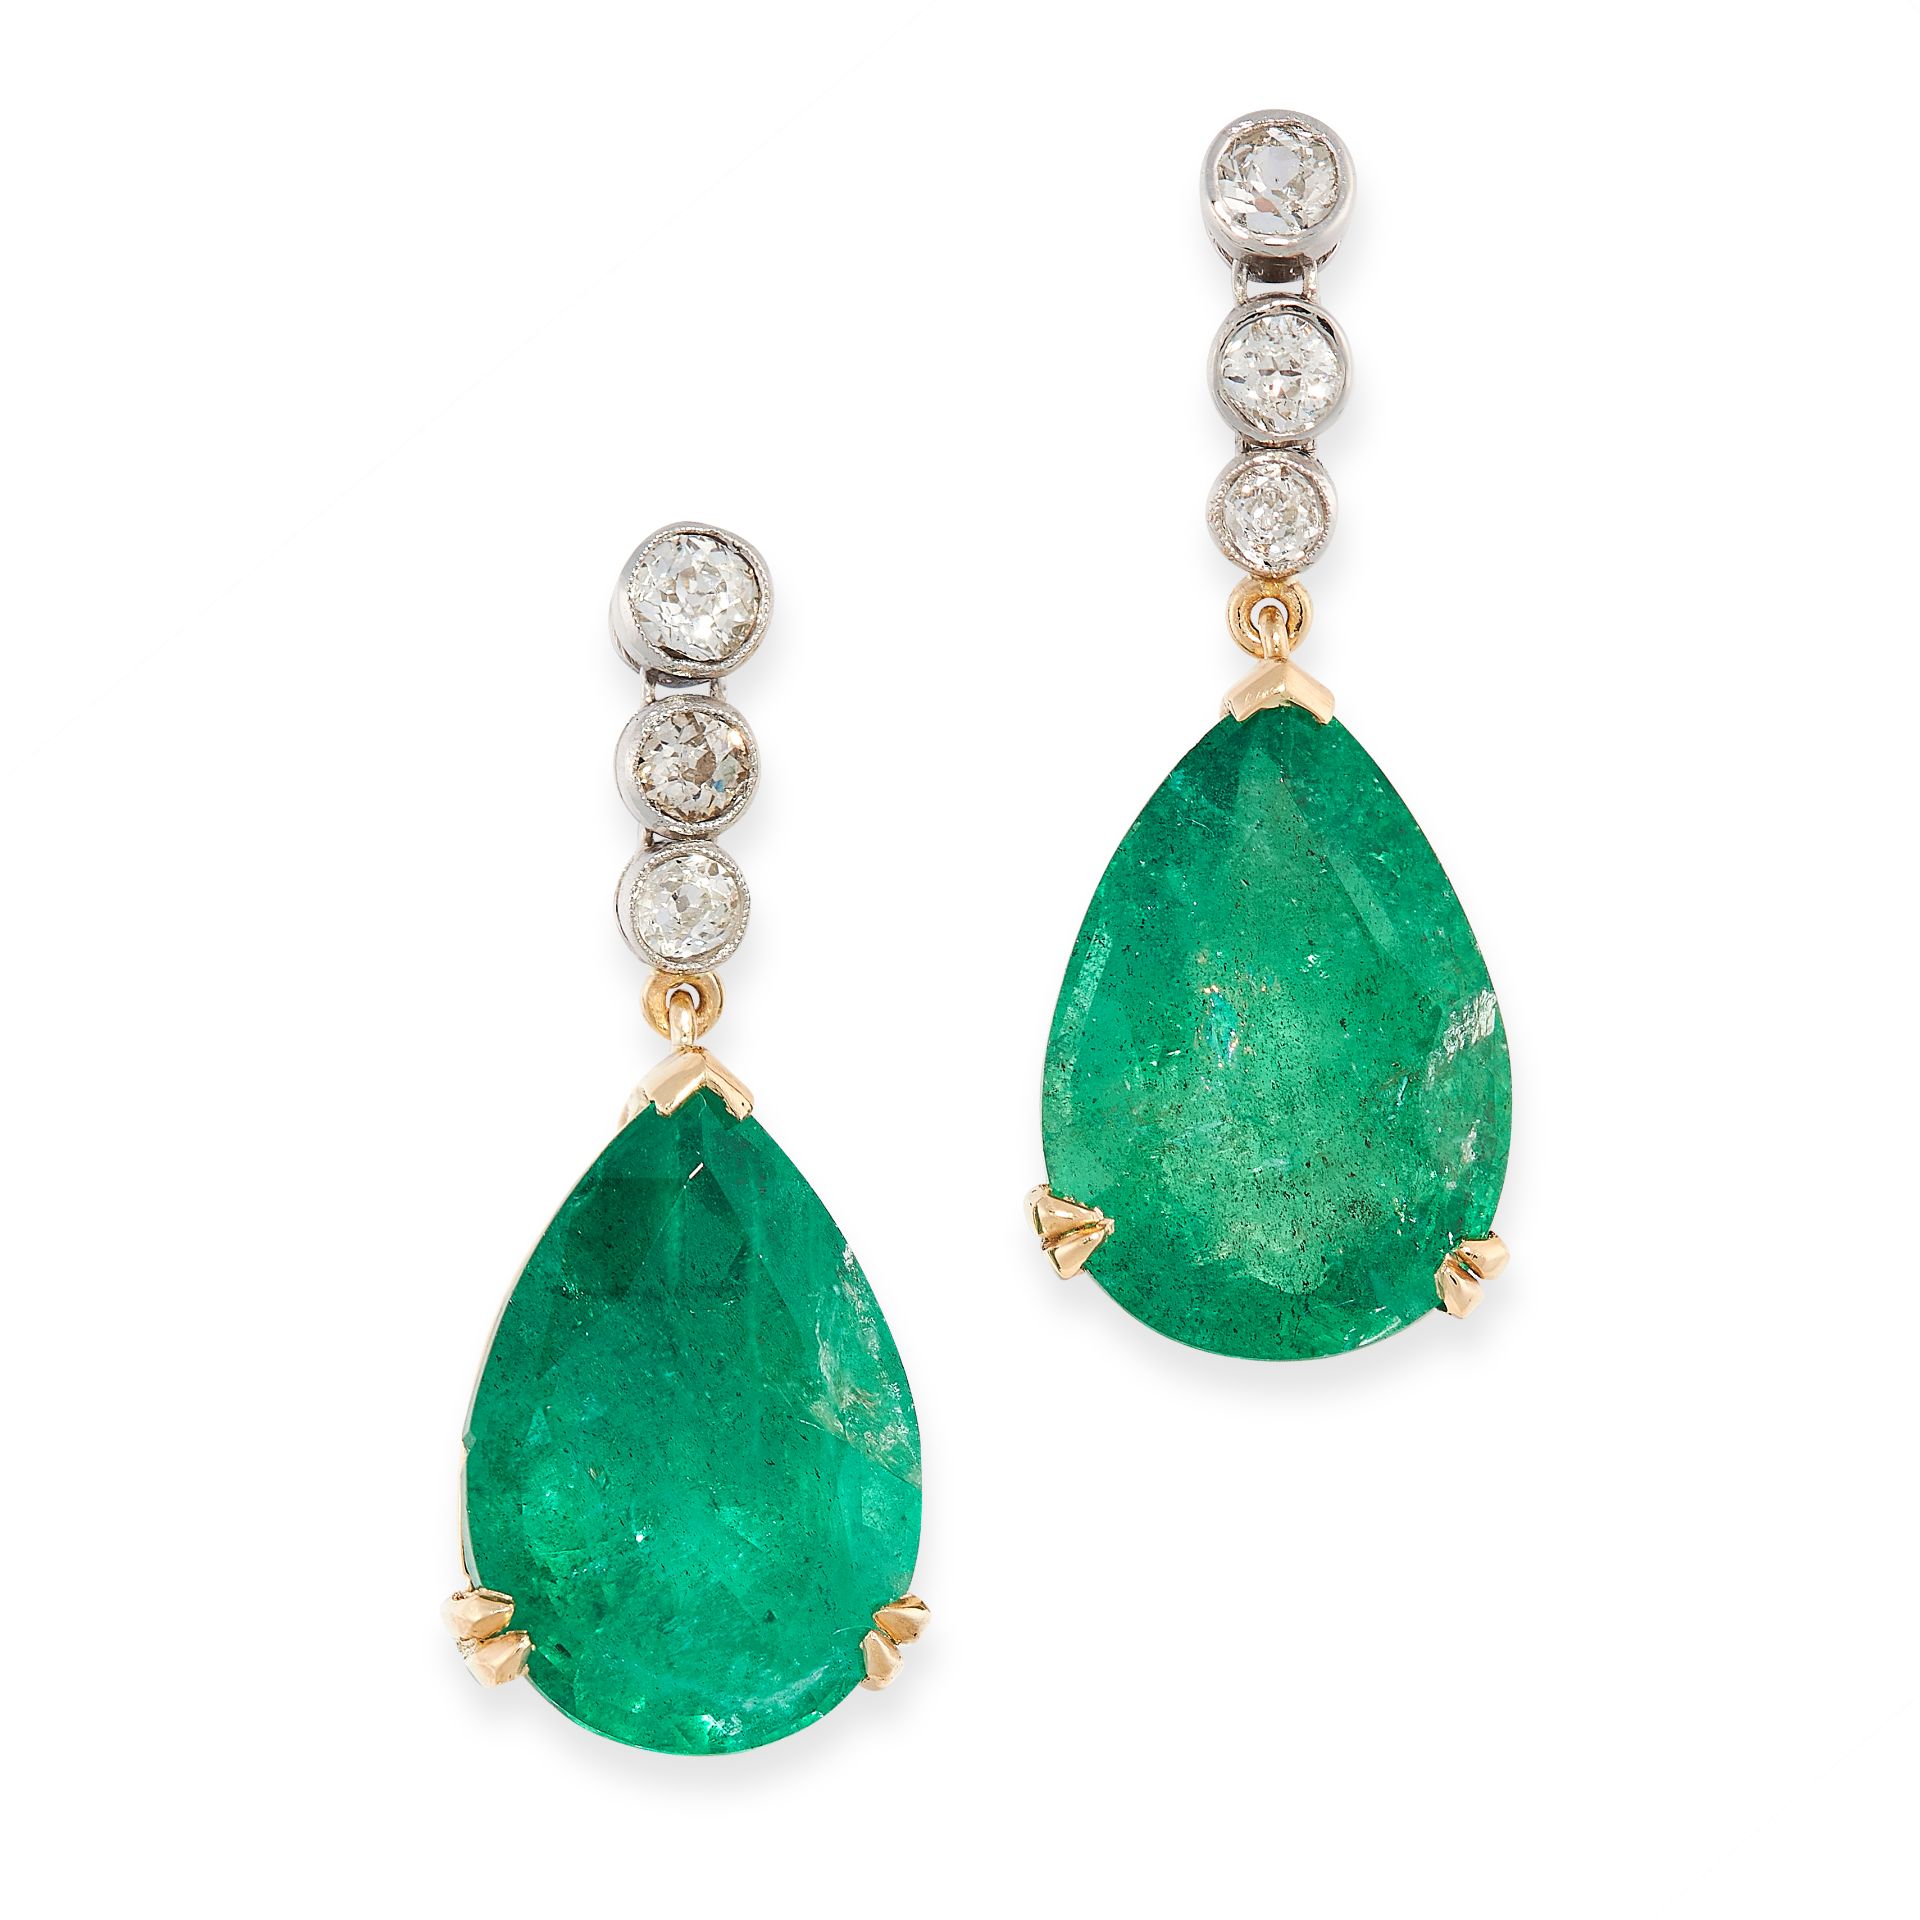 PAIR OF EMERALD AND DIAMOND EARRINGS each of pendent design, composed of a line of collet-set